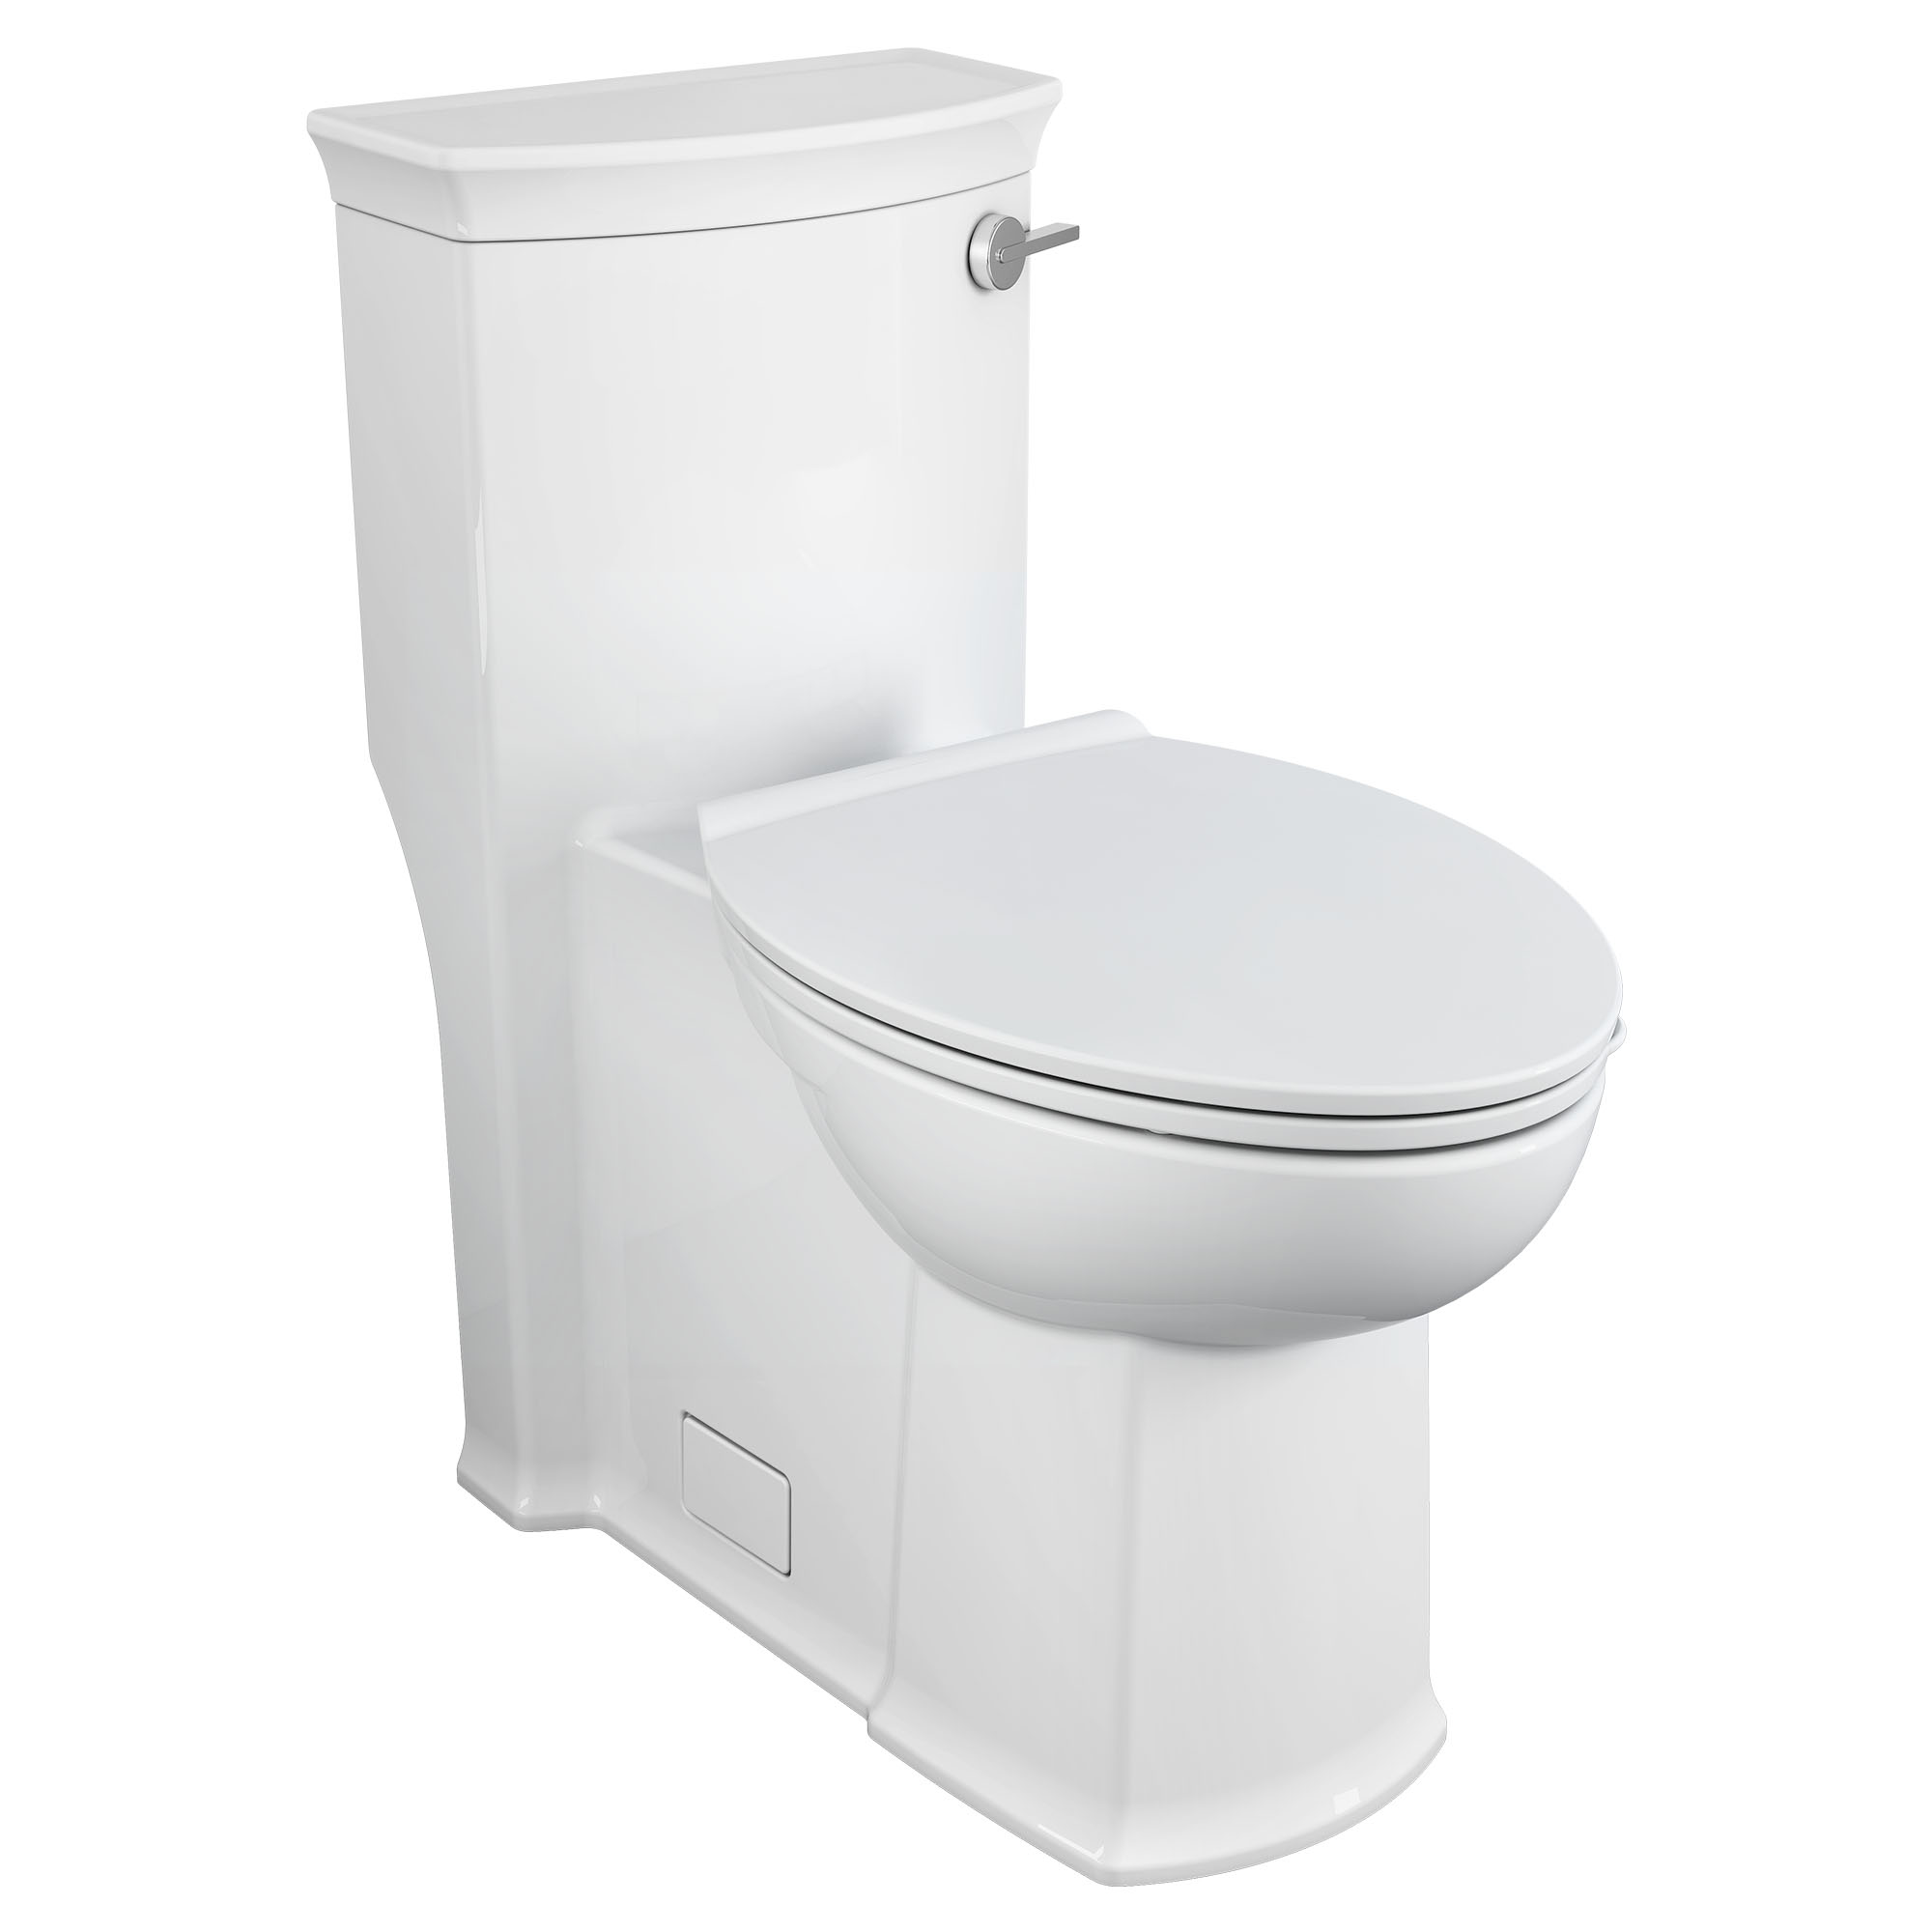 Wyatt® One-Piece Chair-Height Right-Hand Trip Lever Elongated Toilet with Seat